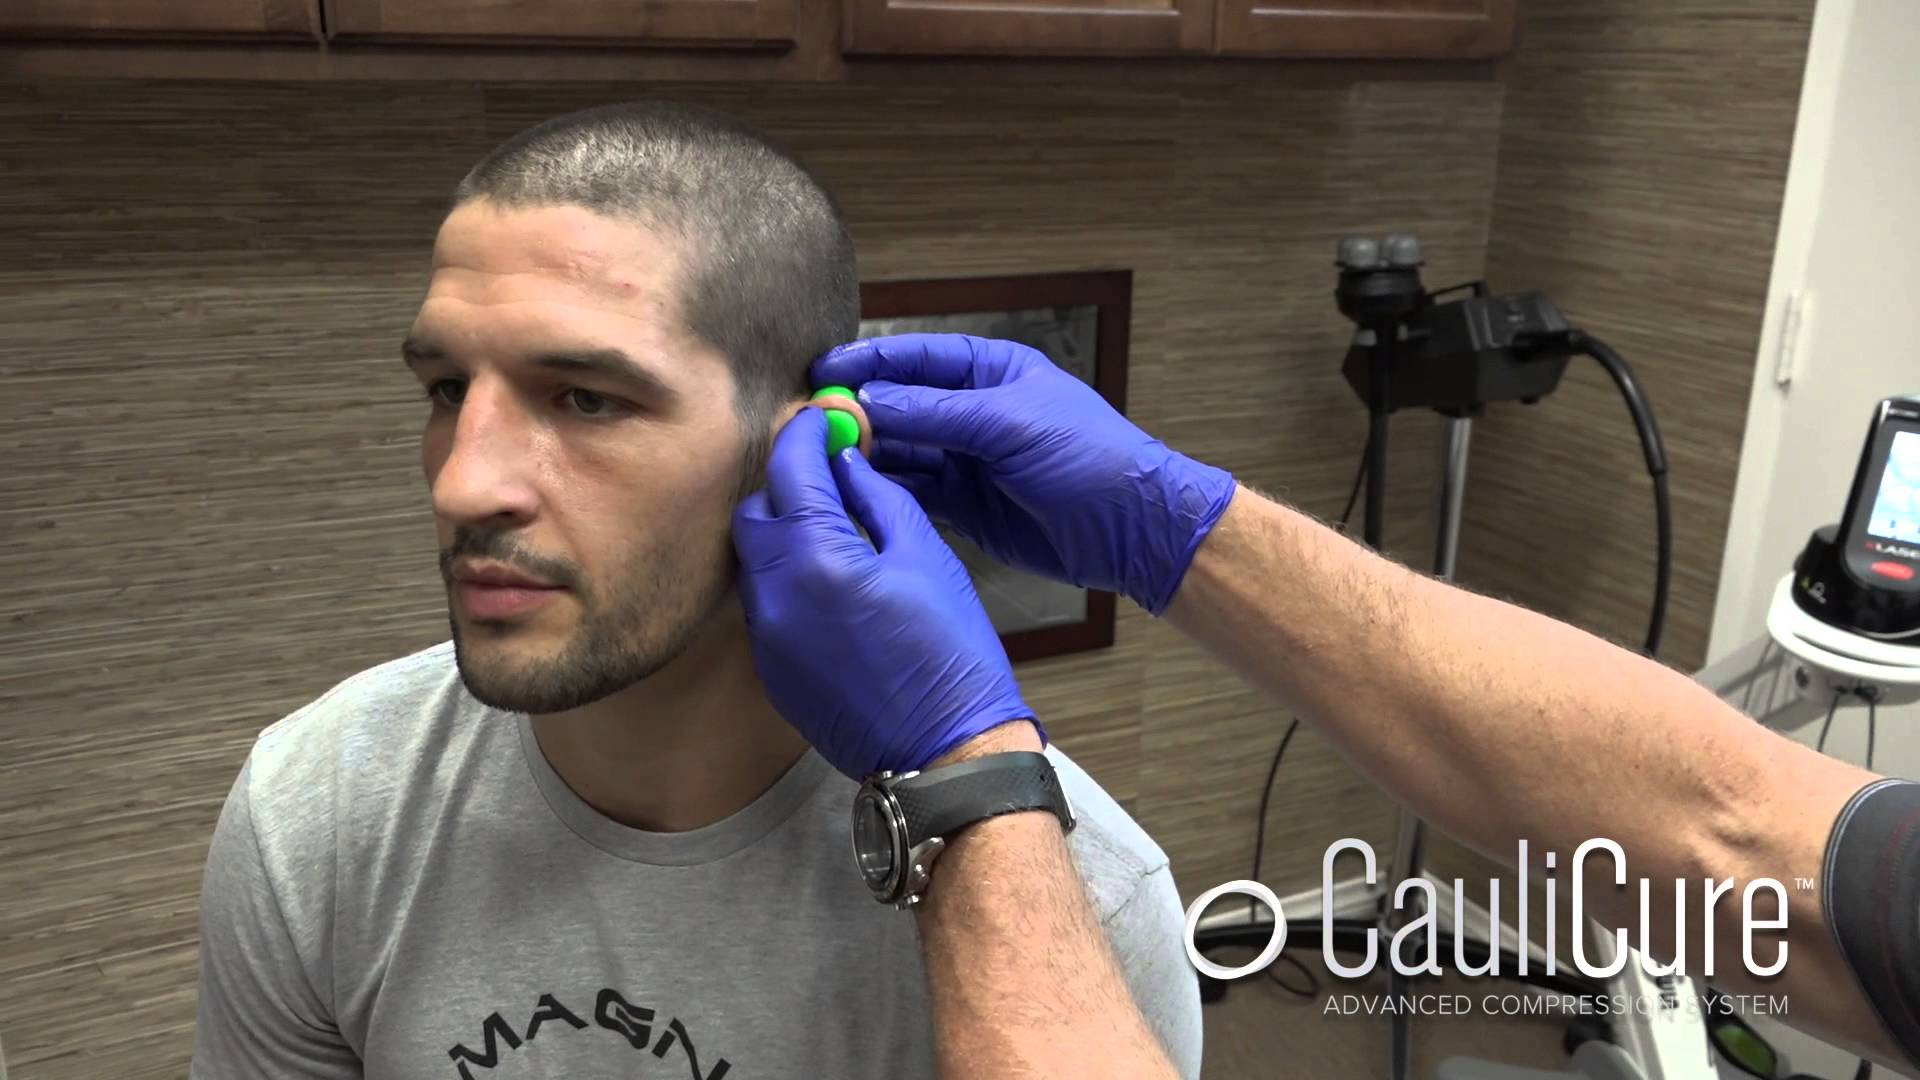 CauliCure for the prevention of Cauliflower ear